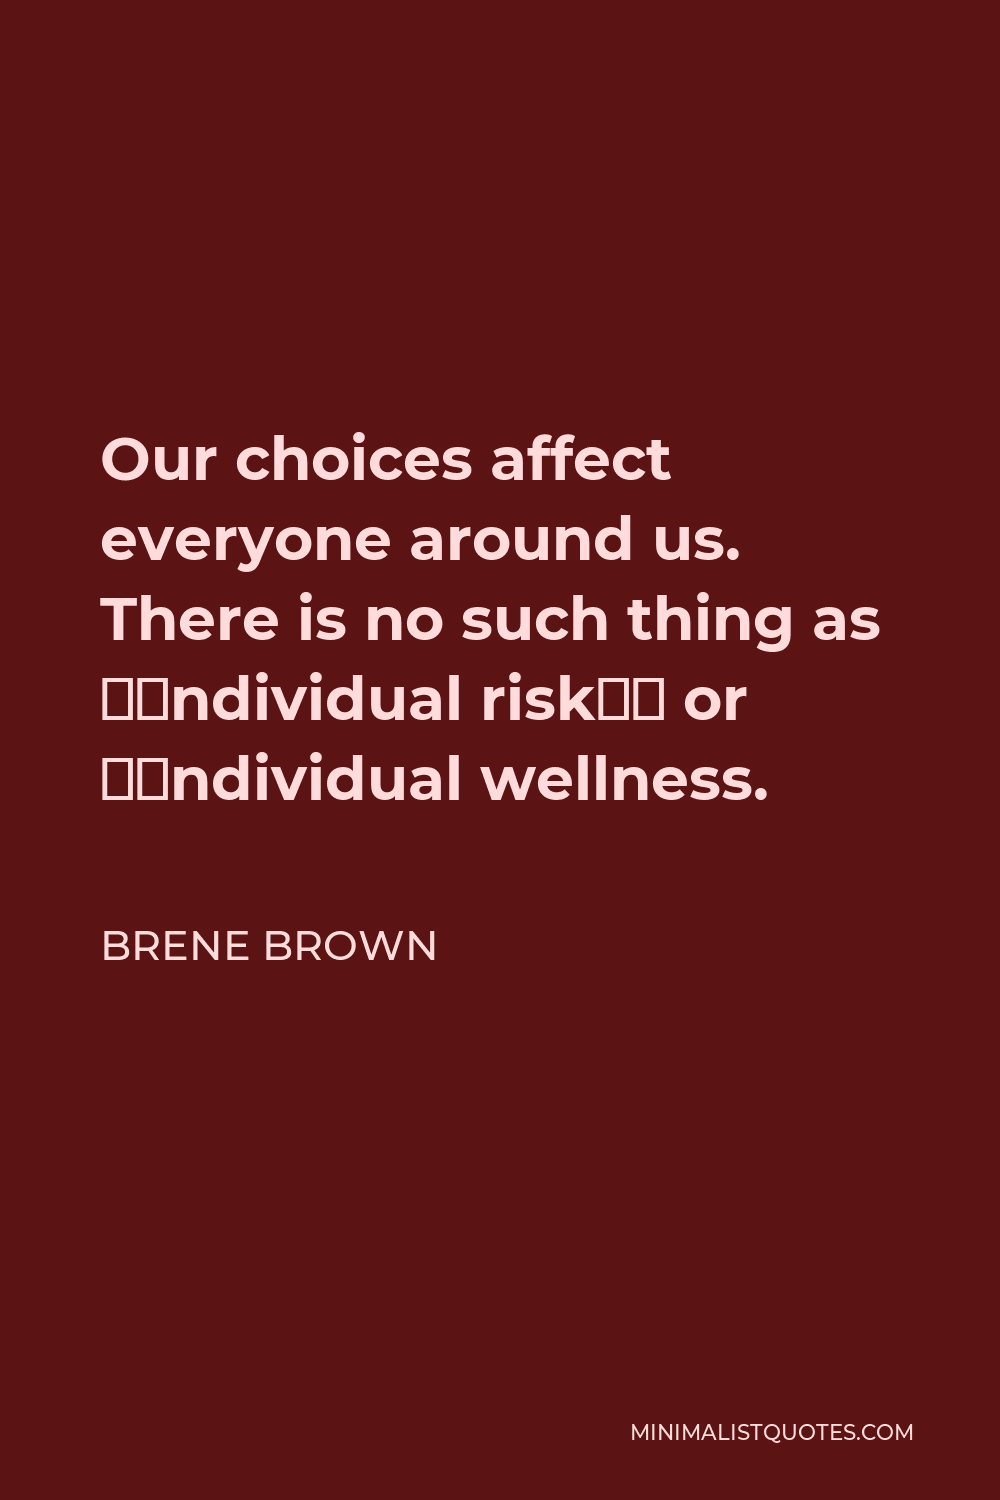 Brene Brown Quote - Our choices affect everyone around us. There is no such thing as “individual risk” or “individual wellness.